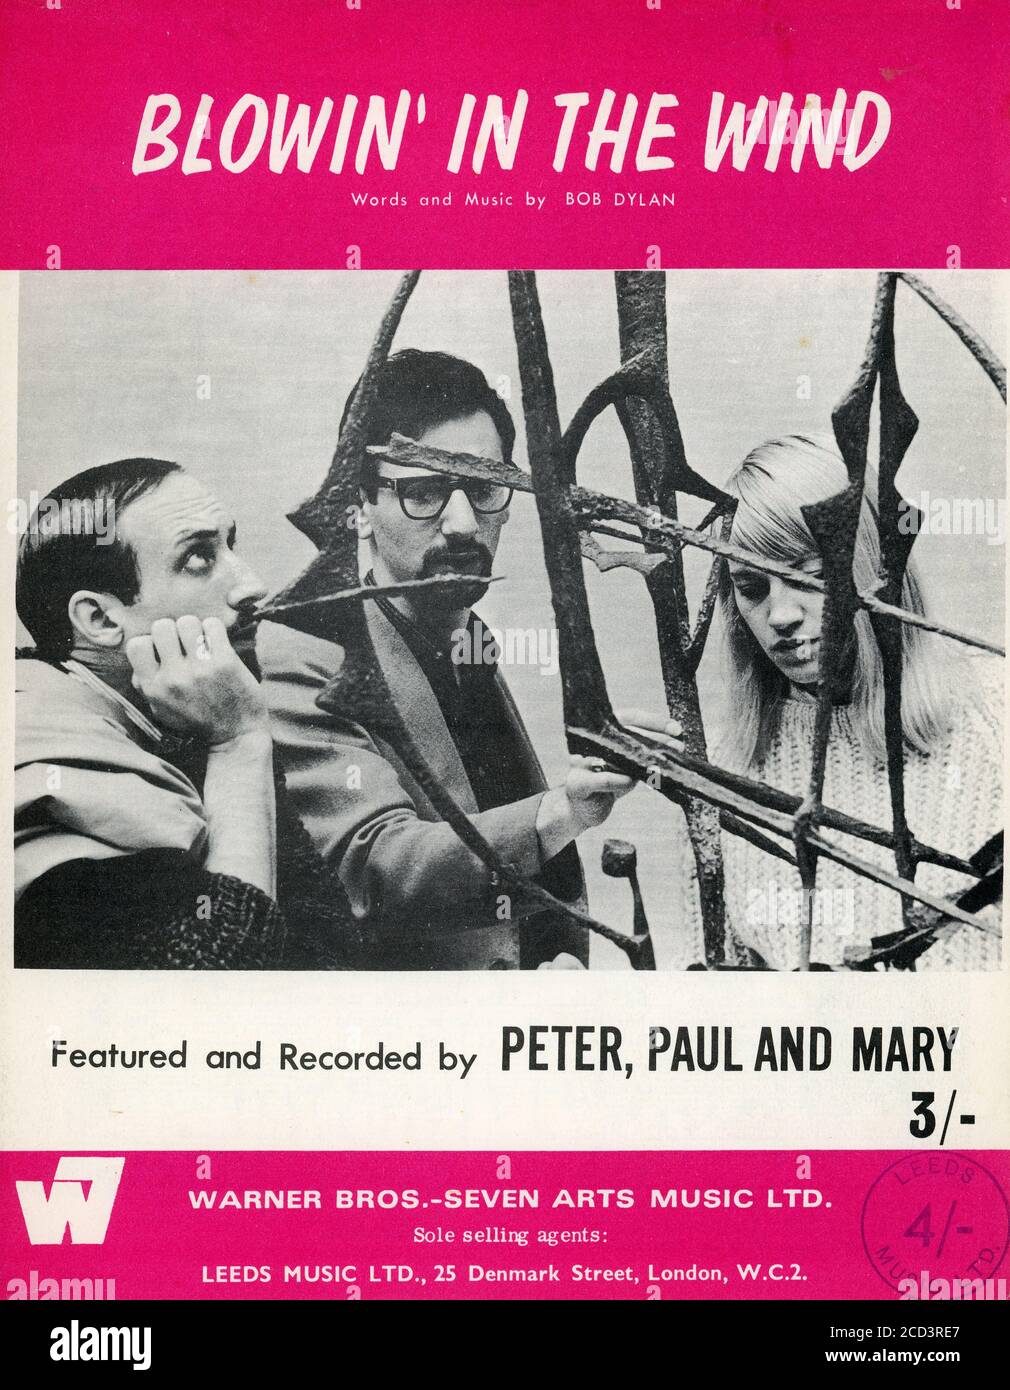 Sheet Music - Blowin' in the Wind - Peter, Paul and Mary - 1963 Stock Photo